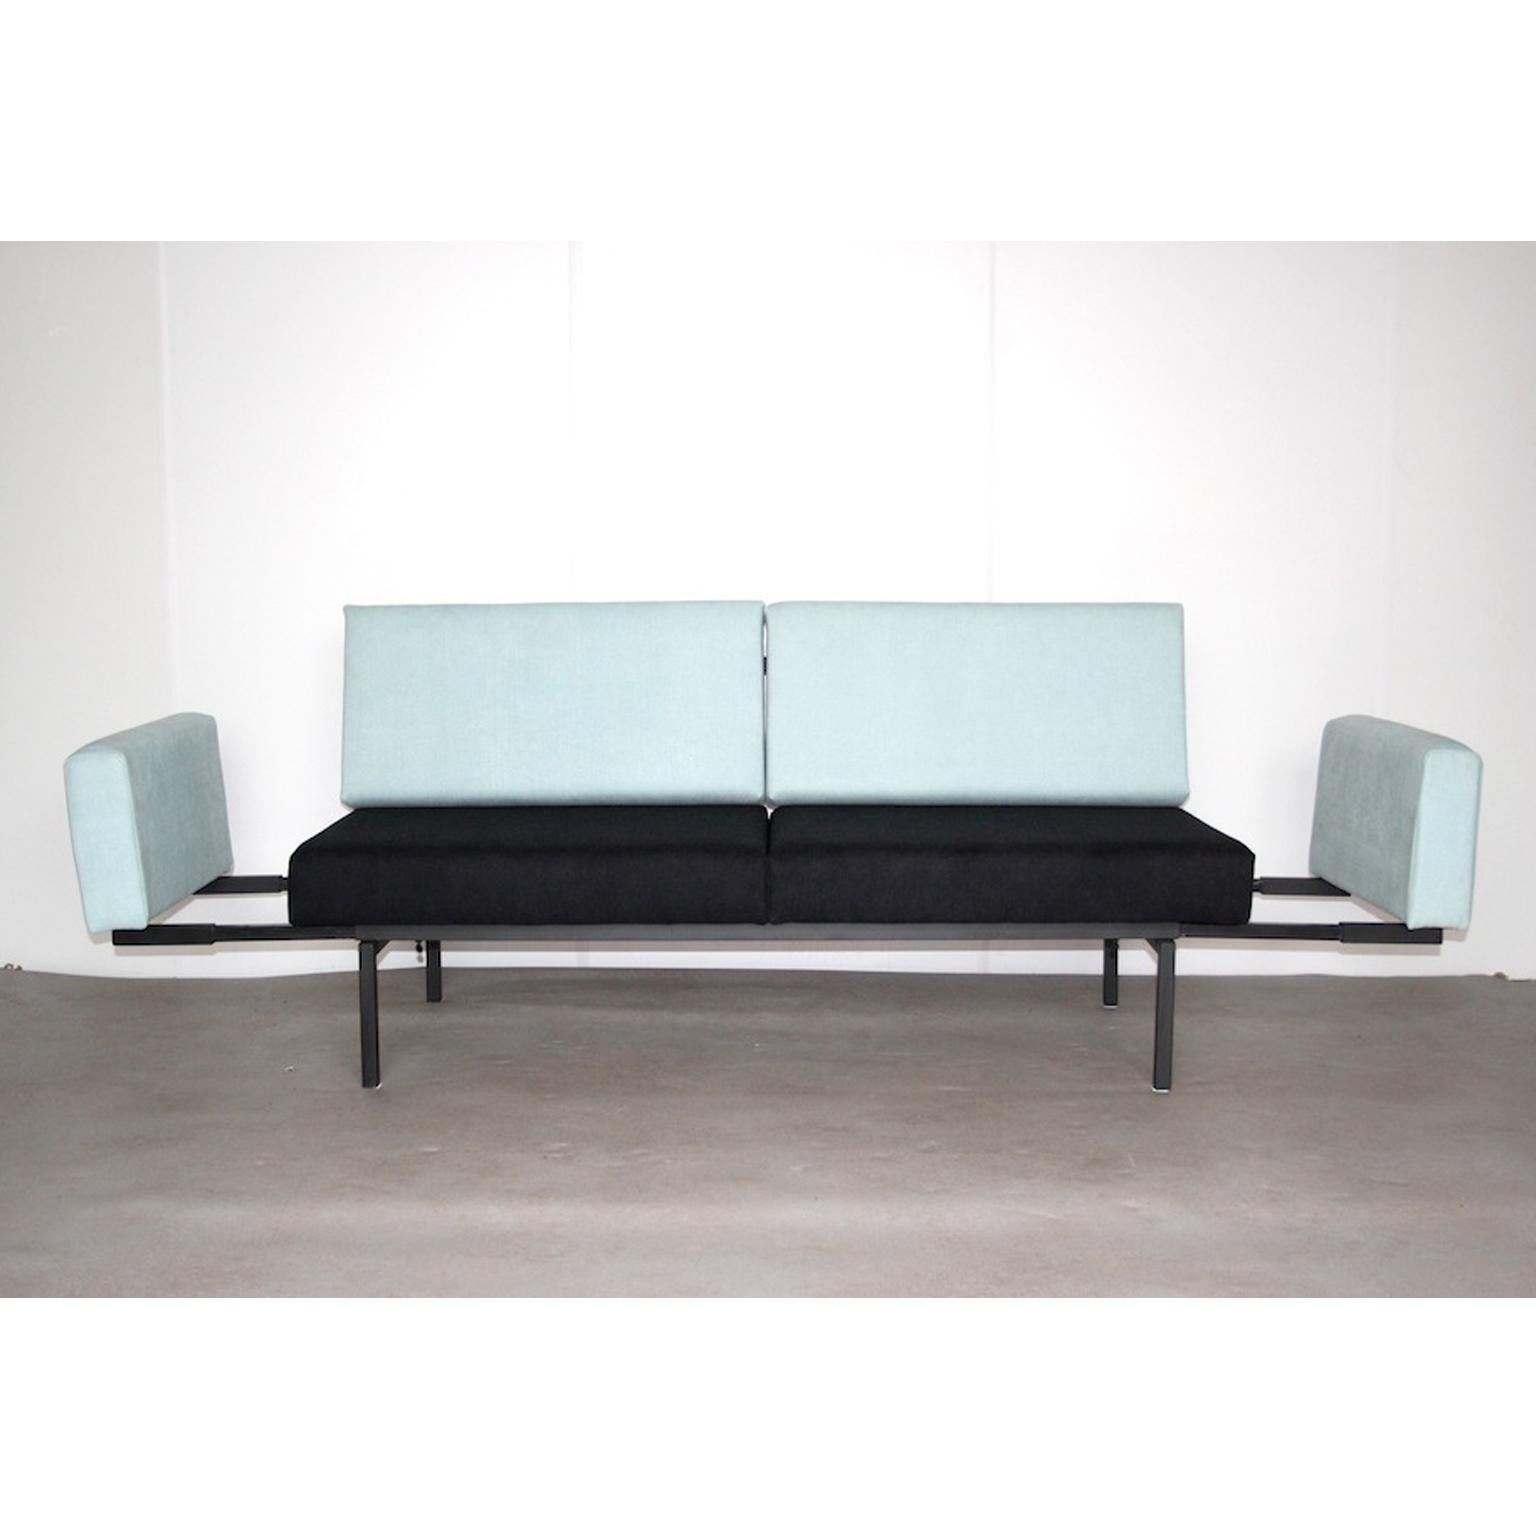 20th Century Sofa or Daybed by Coen de Vries for Devo, Dutch Design, 1952